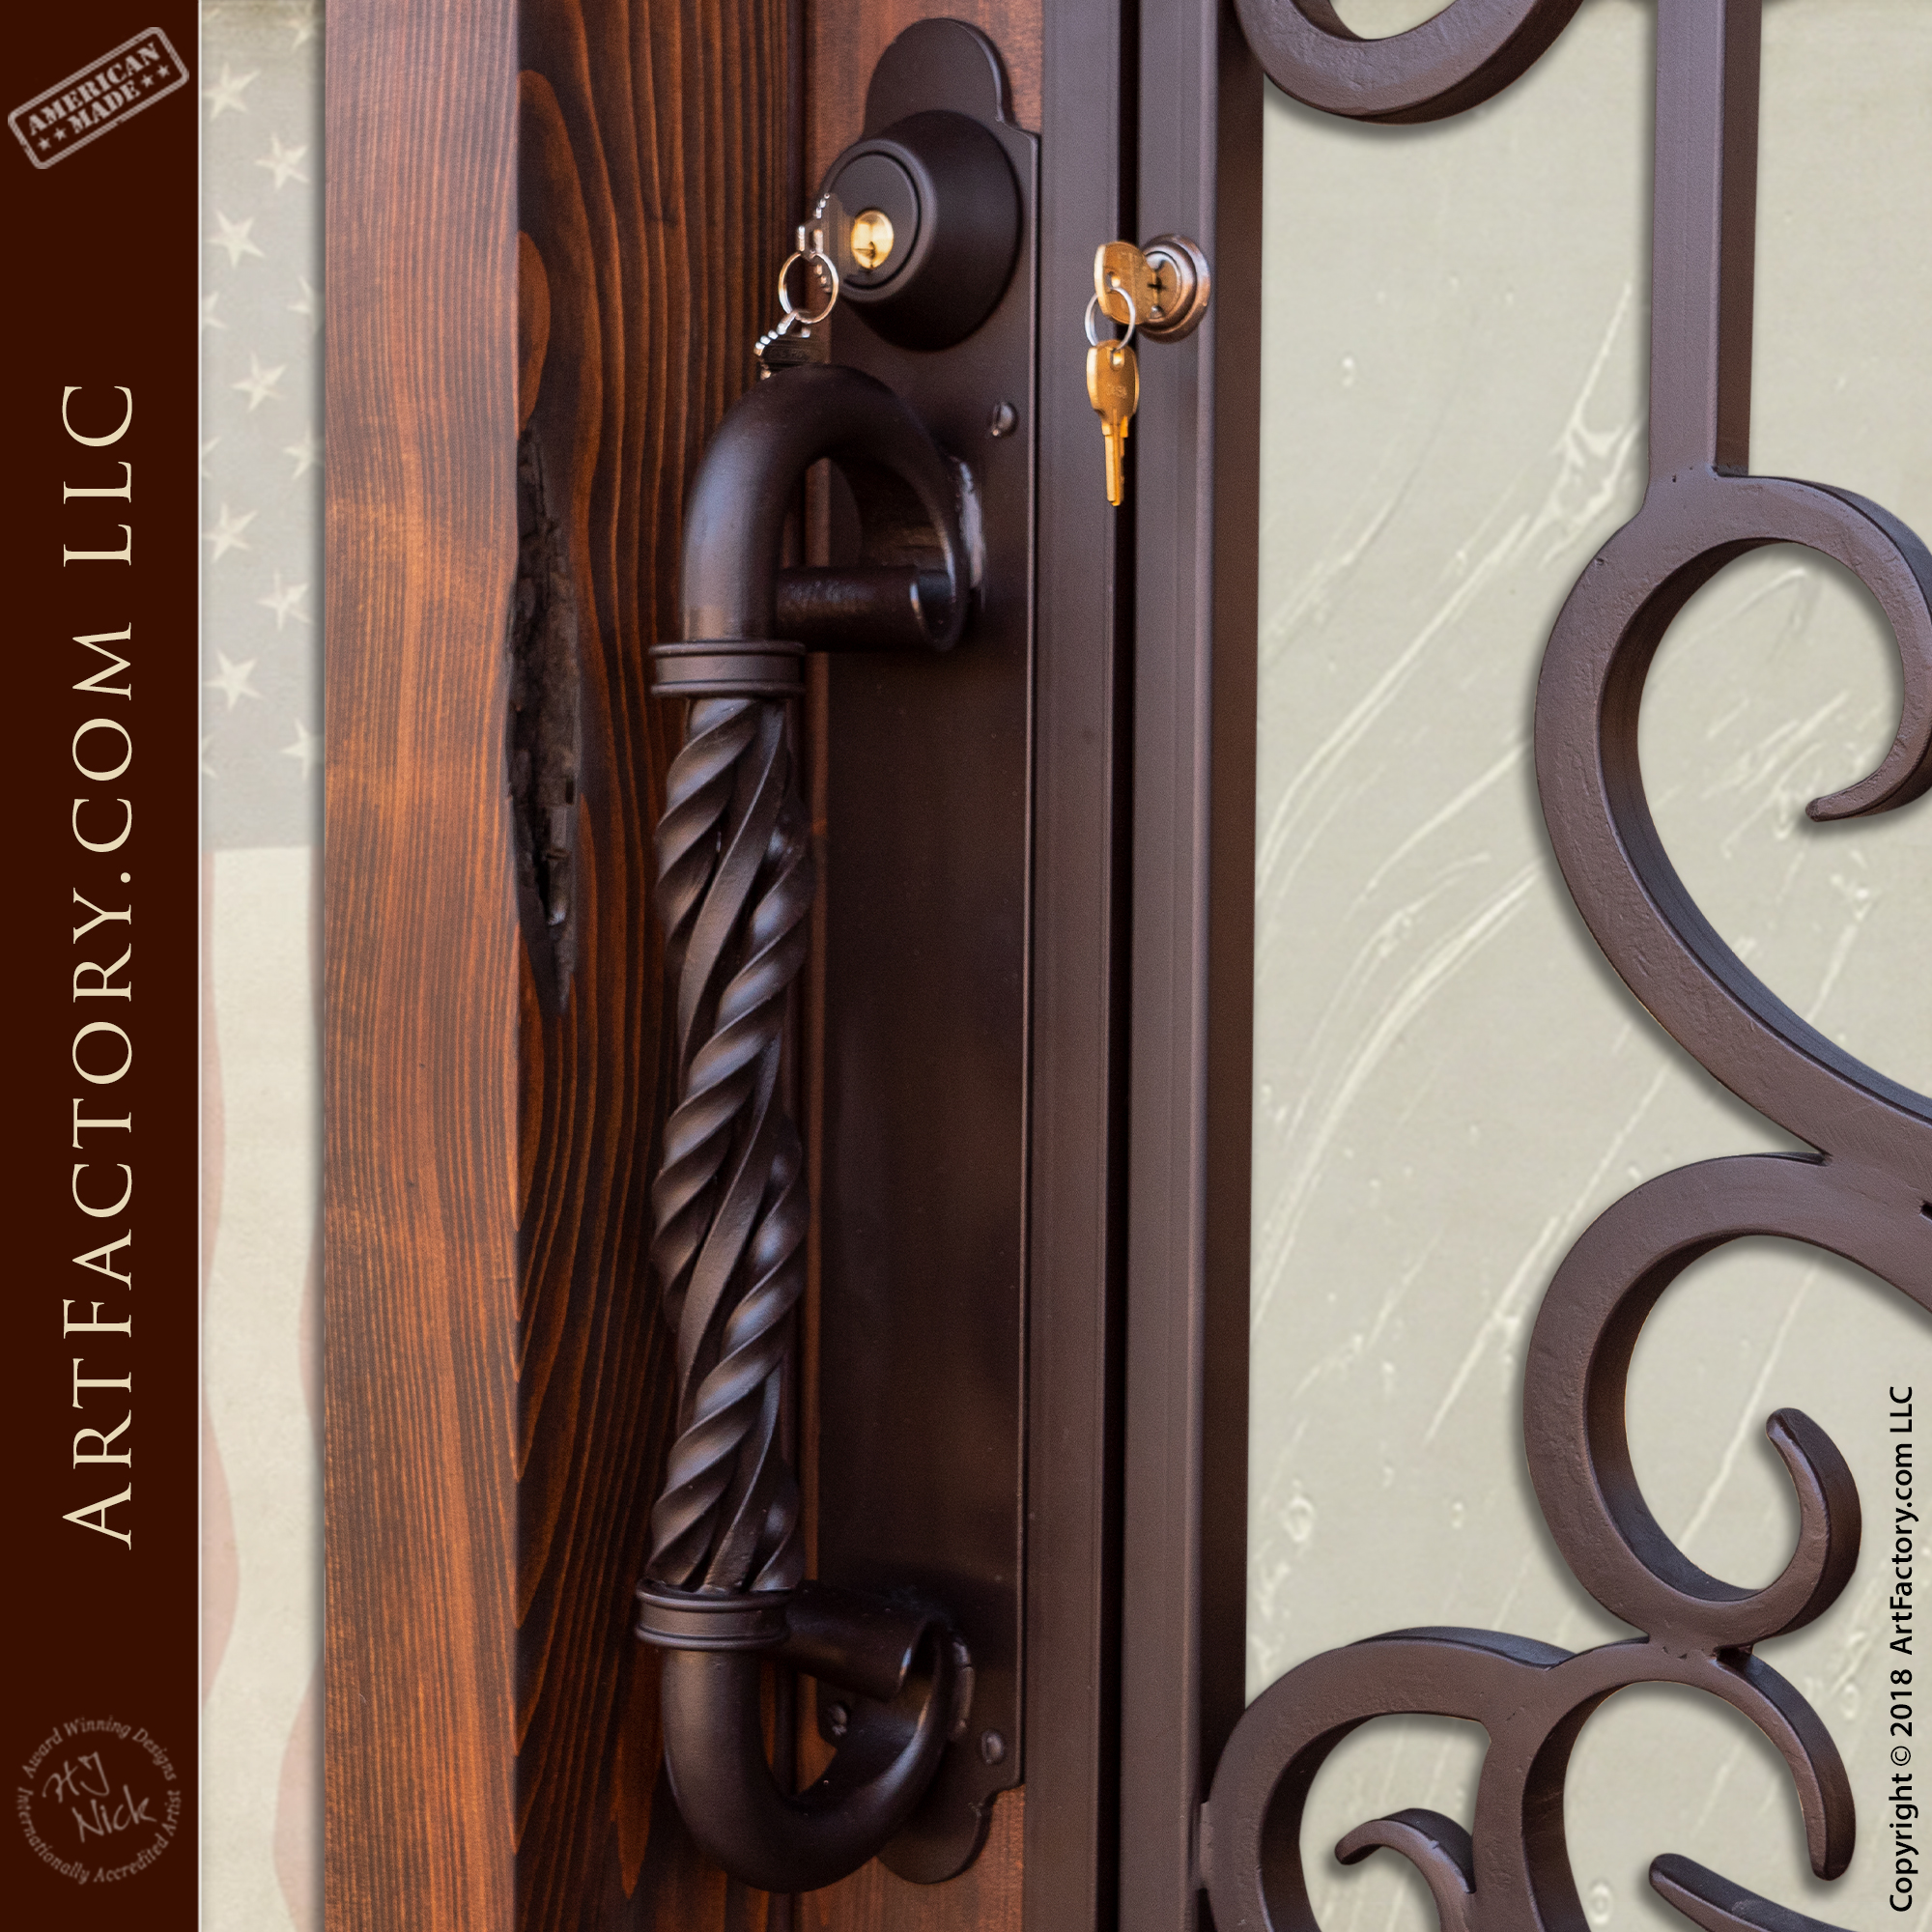 Double Twist C-Shaped Door Handle: Genuine Hand Twisted Wrought Iron